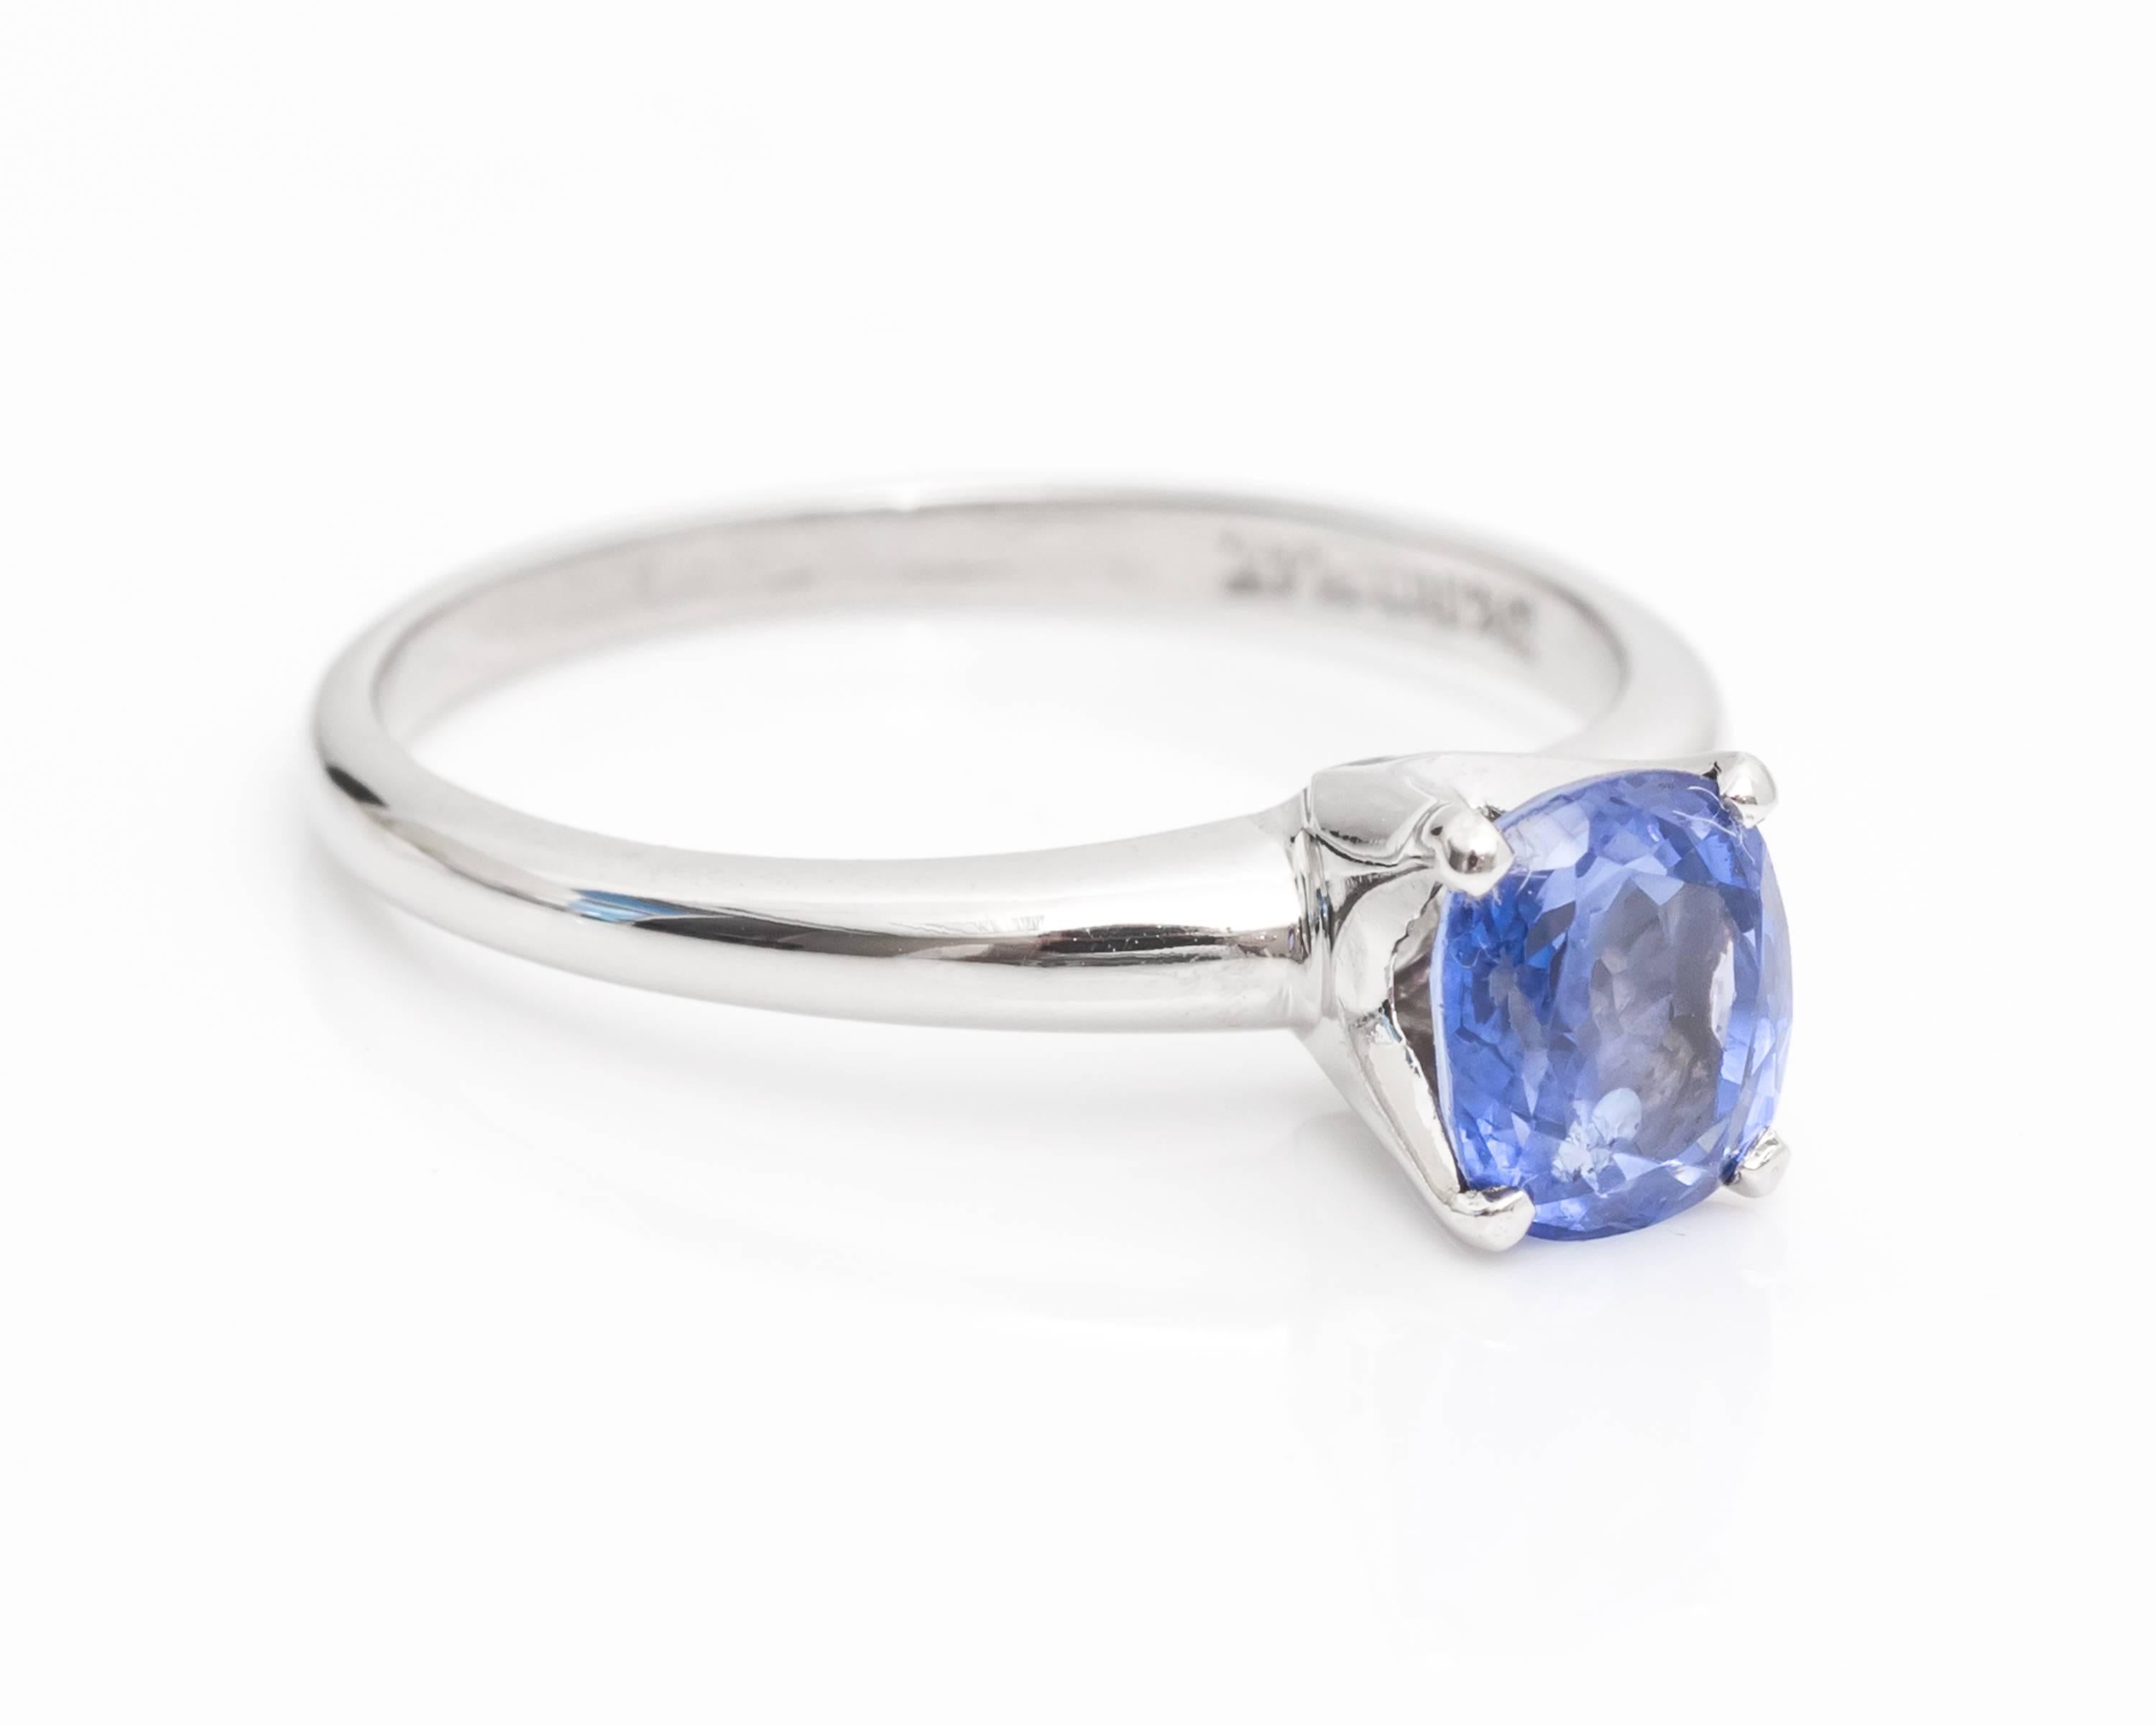 Beautiful Ring with a Cornflower Blue/Purplish Color Sapphire
Features a Cushion/Oval Shape, giving it plenty of sparkle from all angles and allows an elongated look for a slender look. 
Sapphire is a total of 1 carat total weight
Ideal for a